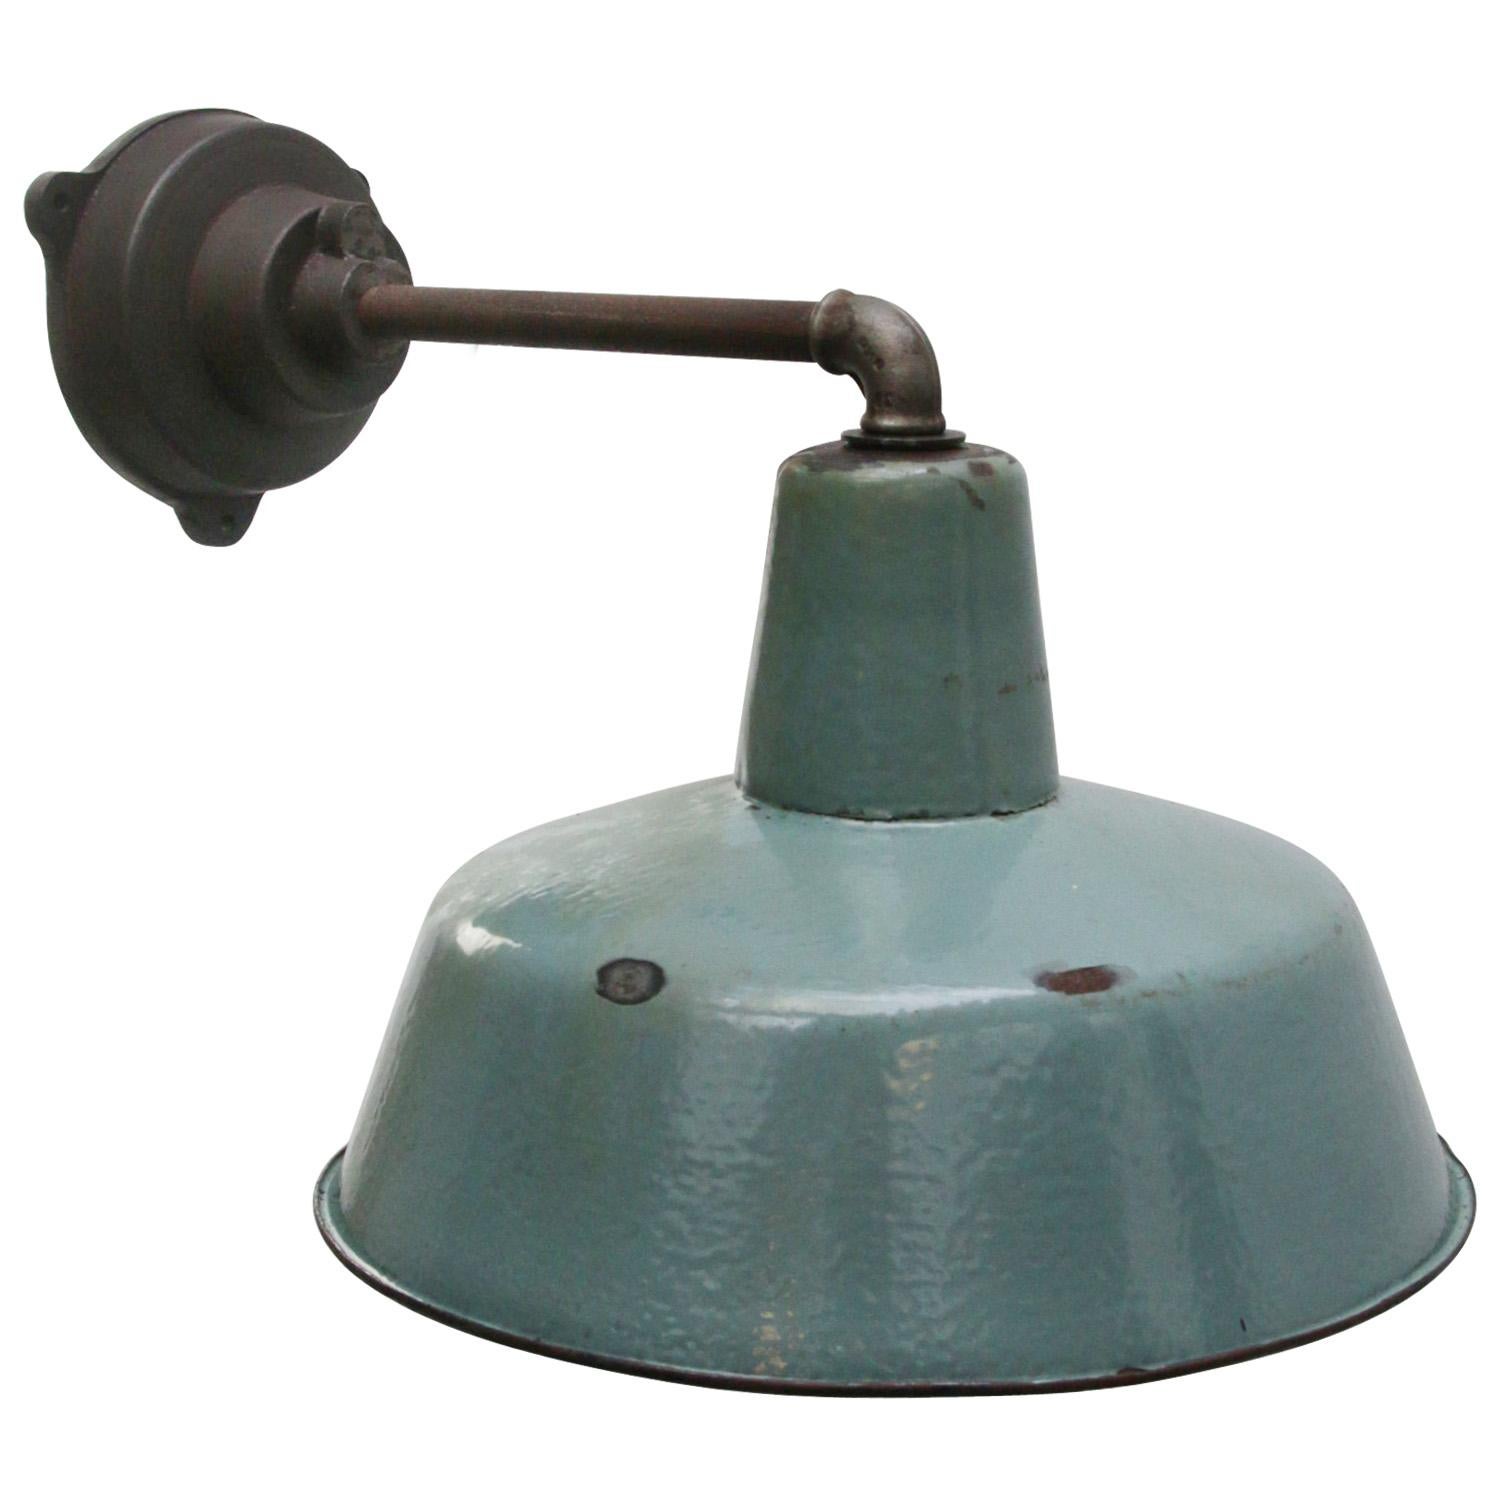 Industrial wall light
Petrol colored enamel shade, white interior
cast iron arm

diameter cast iron wall piece: 12 cm, 3 holes to secure

Weight: 3.10 kg / 6.8 lb

Priced per individual item. All lamps have been made suitable by